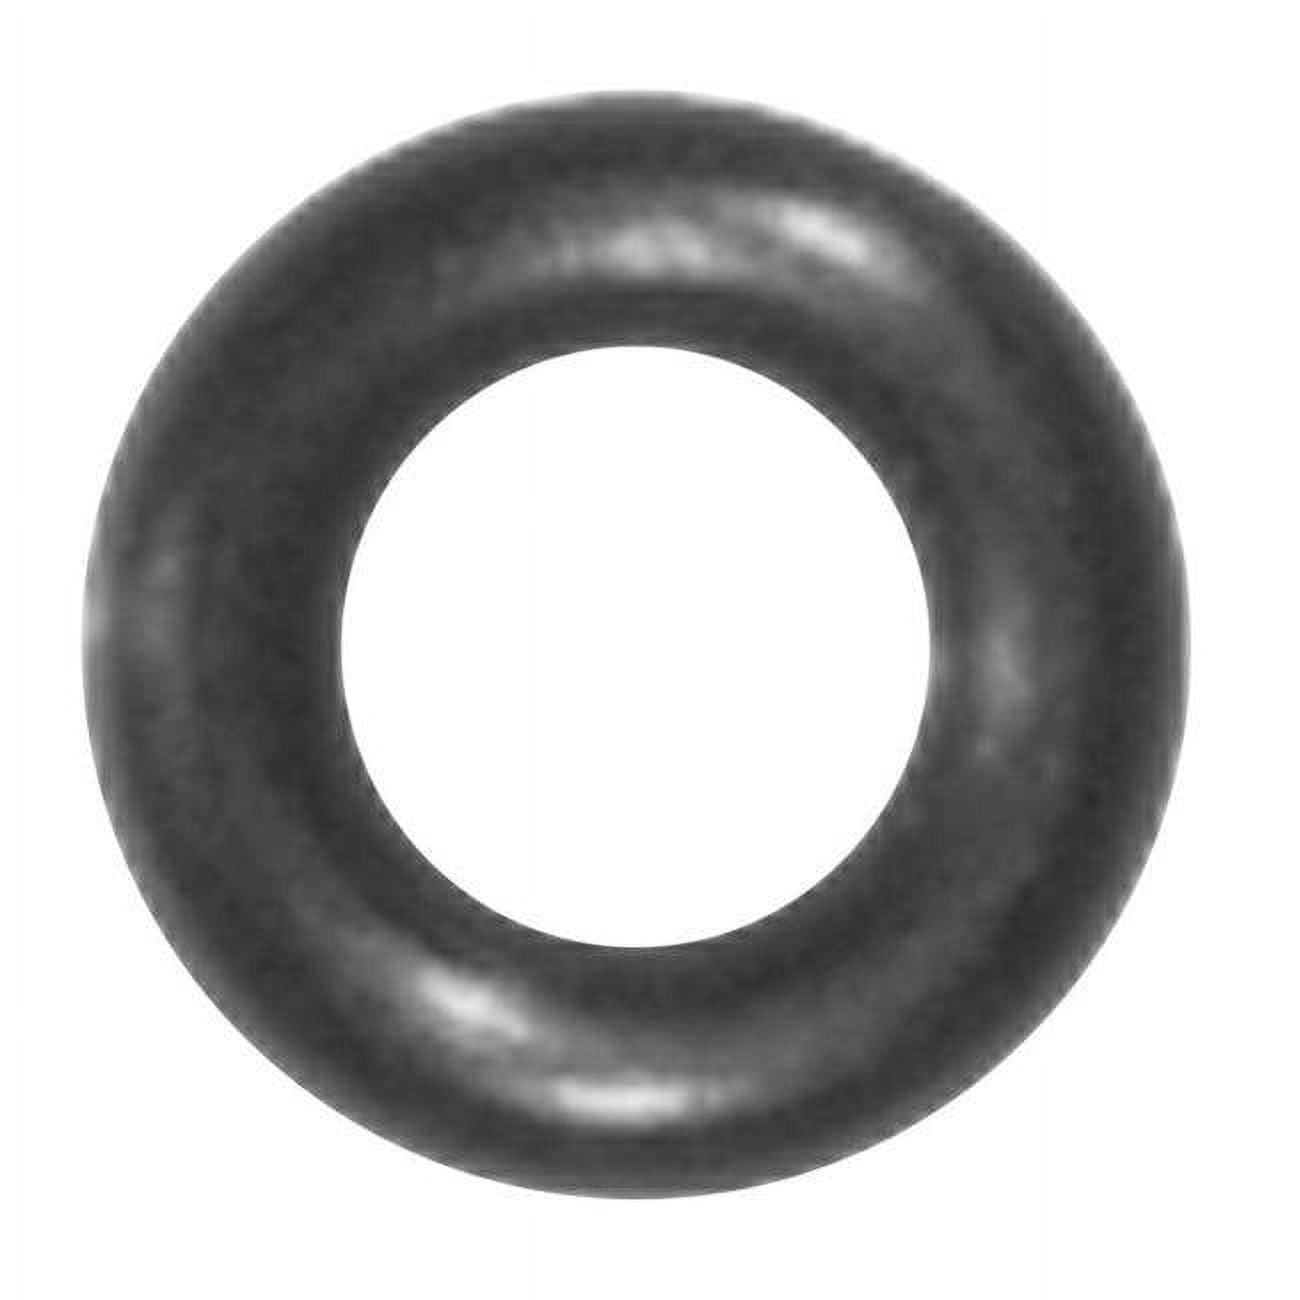 35775b 0.29 X 0.15 X 0.06 In. O Ring- Pack Of 5